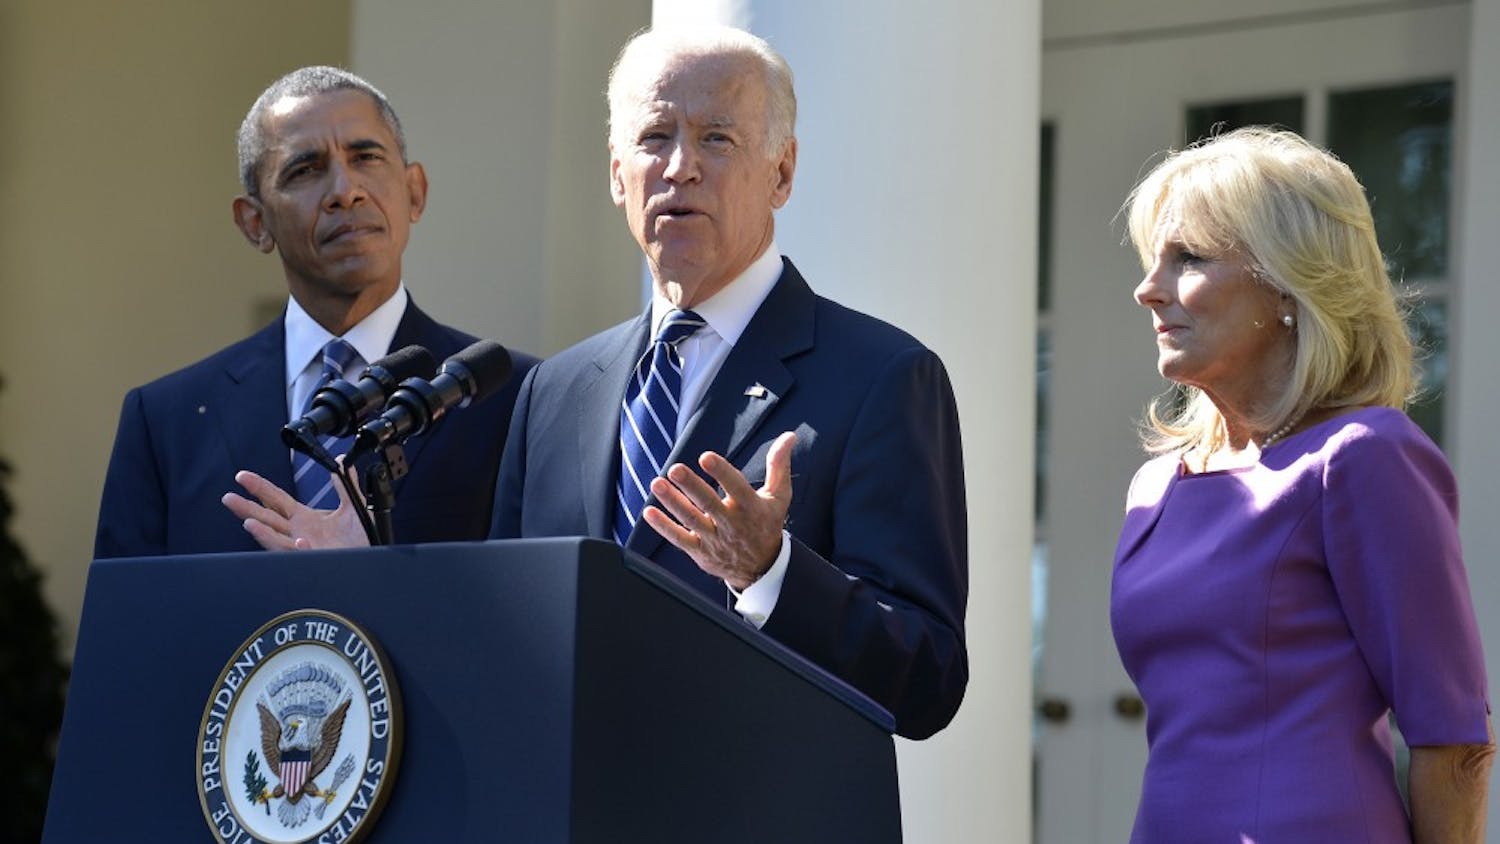 U.S. Vice President Joe Biden announces he will not be seeking the Democratic presidential nomination in 2016 as his wife Dr. Jill Biden and President Barack Obama listen on in the Rose Garden of the White House on Wednesday, Oct. 21, 2015. (Mike Theiler/CNP/Zuma Press/TNS)